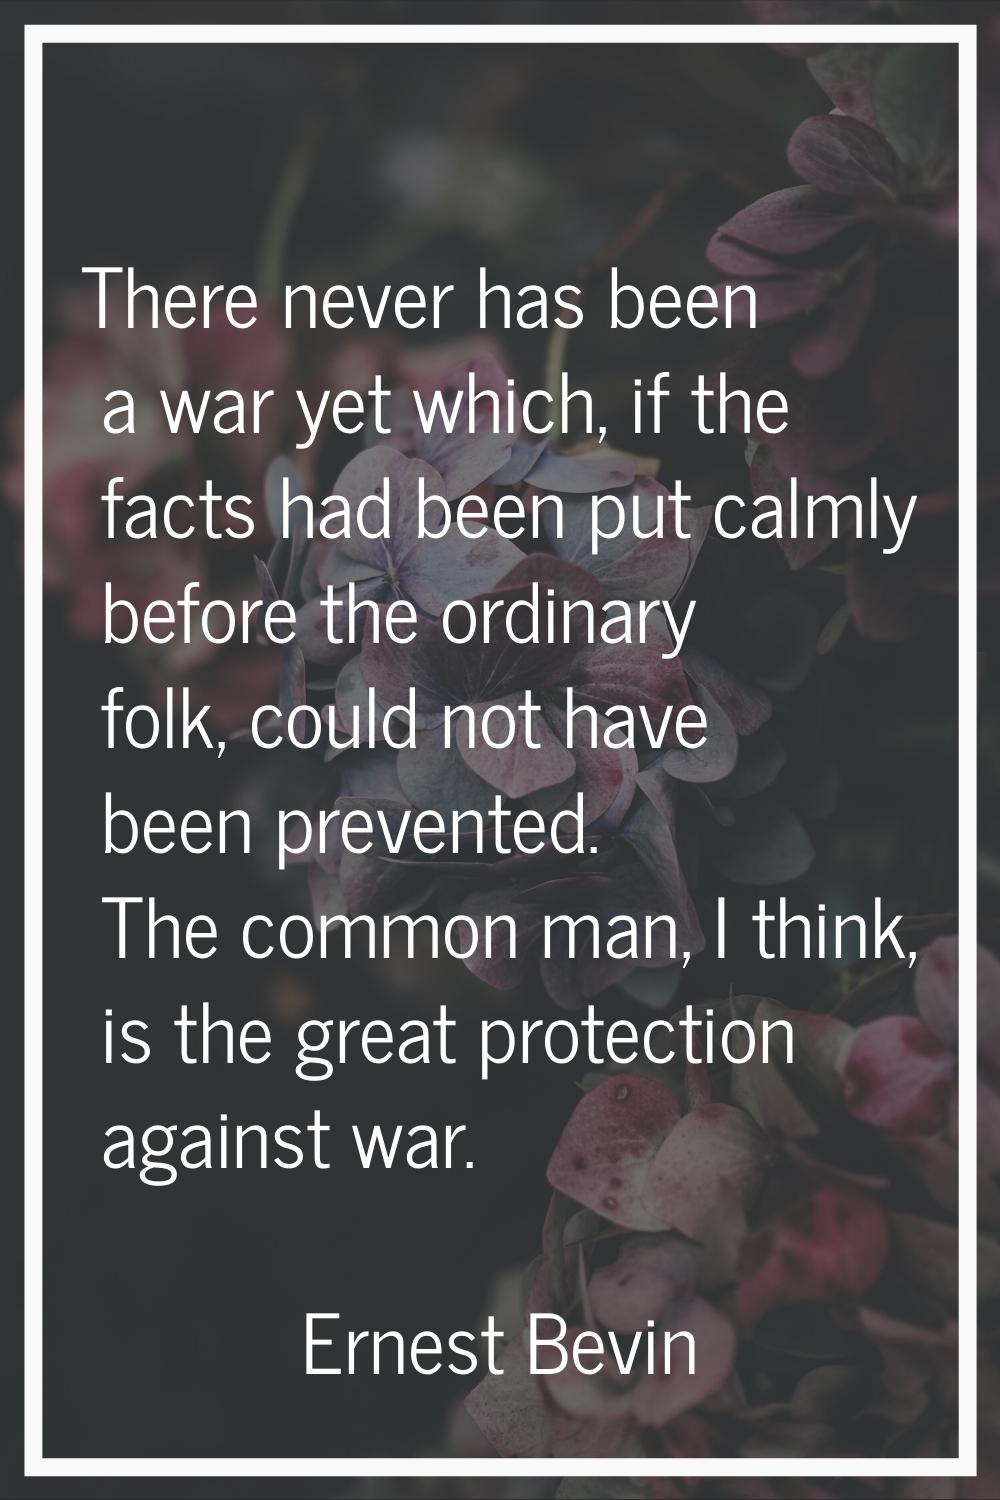 There never has been a war yet which, if the facts had been put calmly before the ordinary folk, co